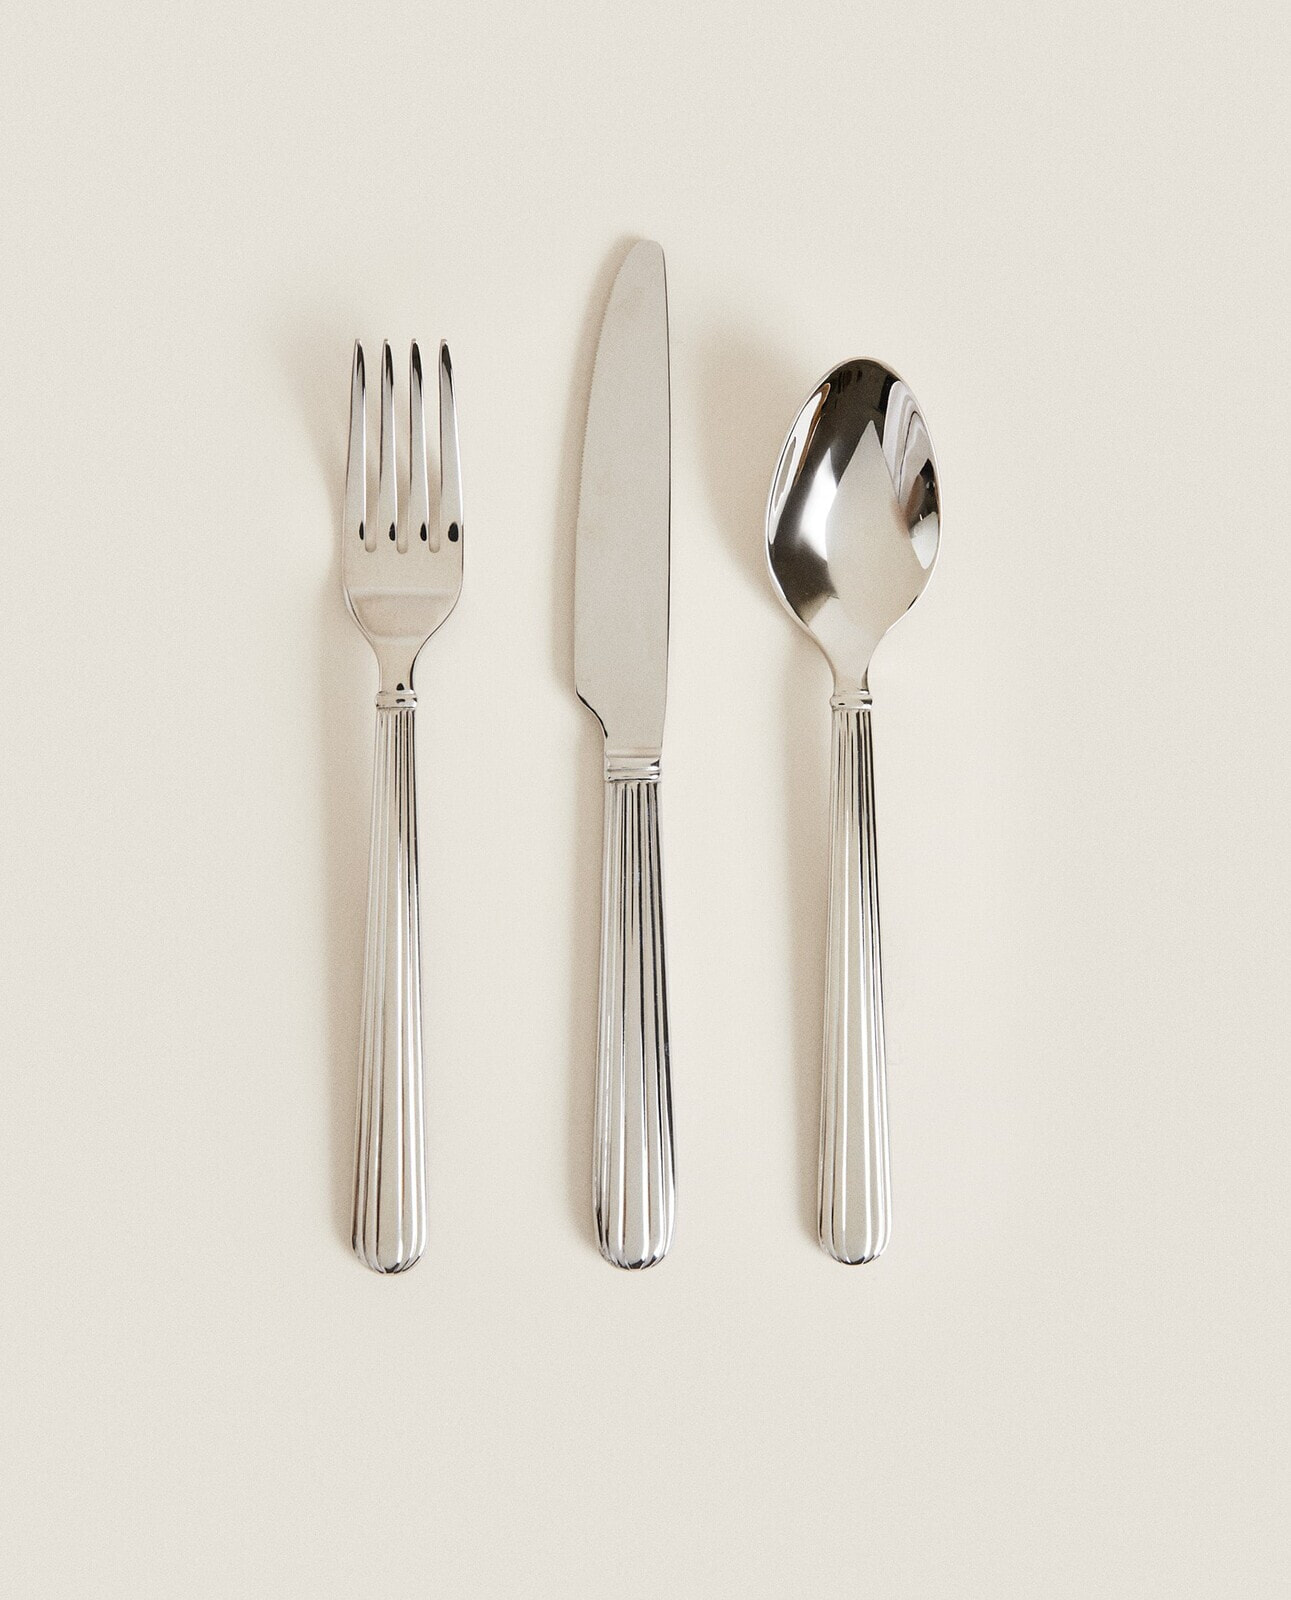 Steel cutlery set with scored handle